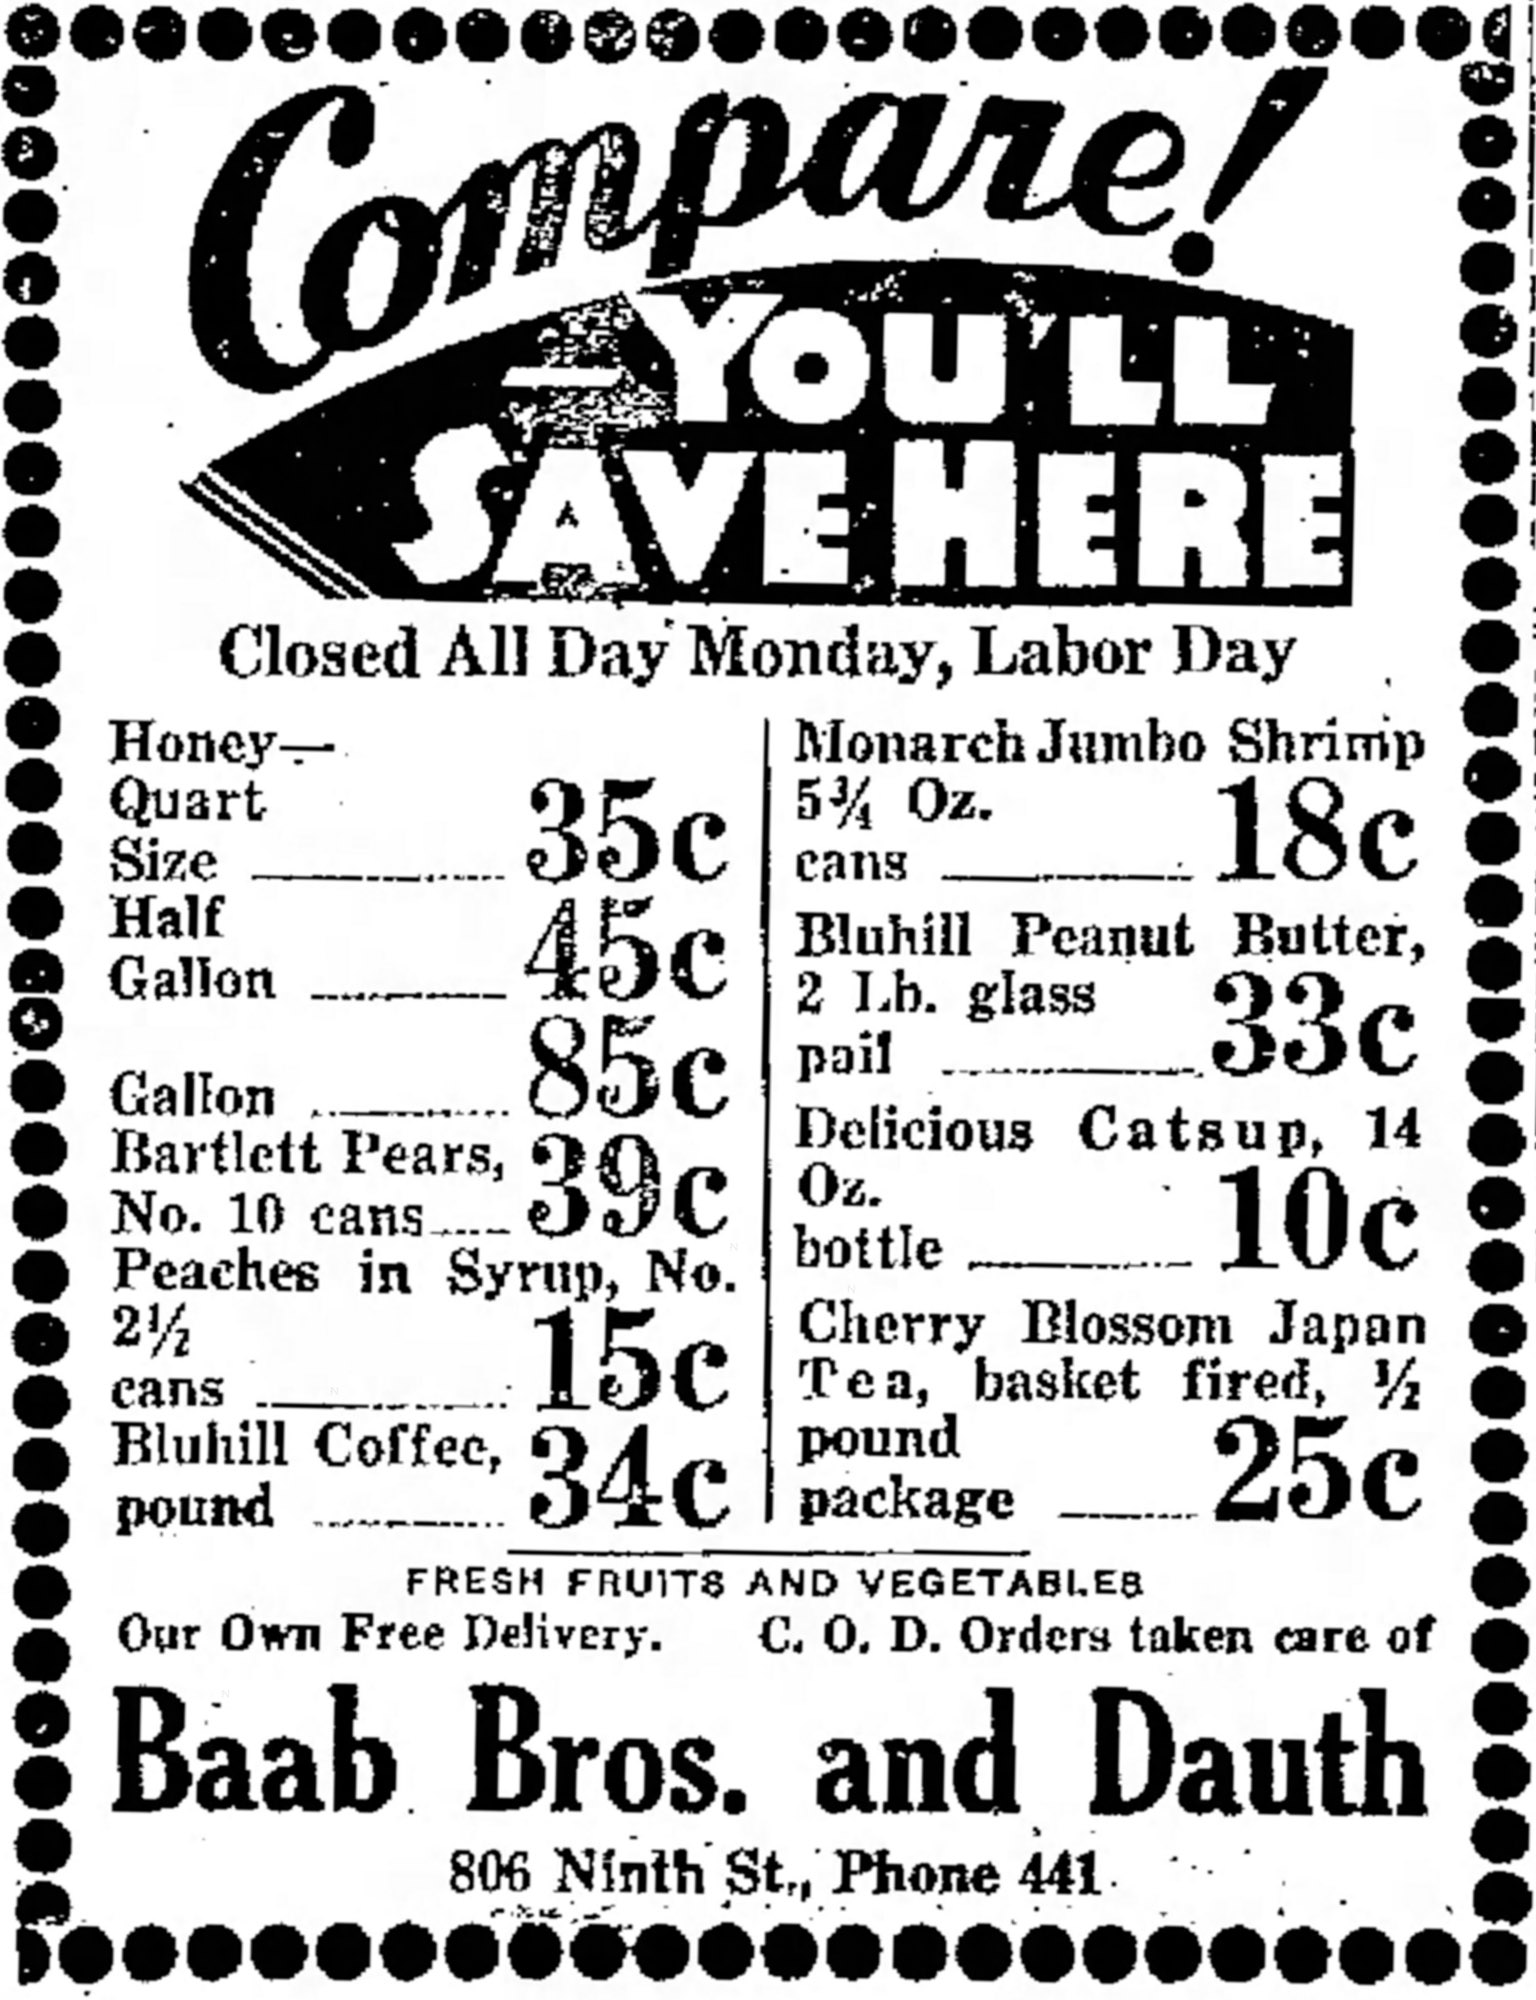 Dauth Family Archive - 1932-09-02 - Greeley Daily Tribune - Baab Bros and Dauth Advertisement